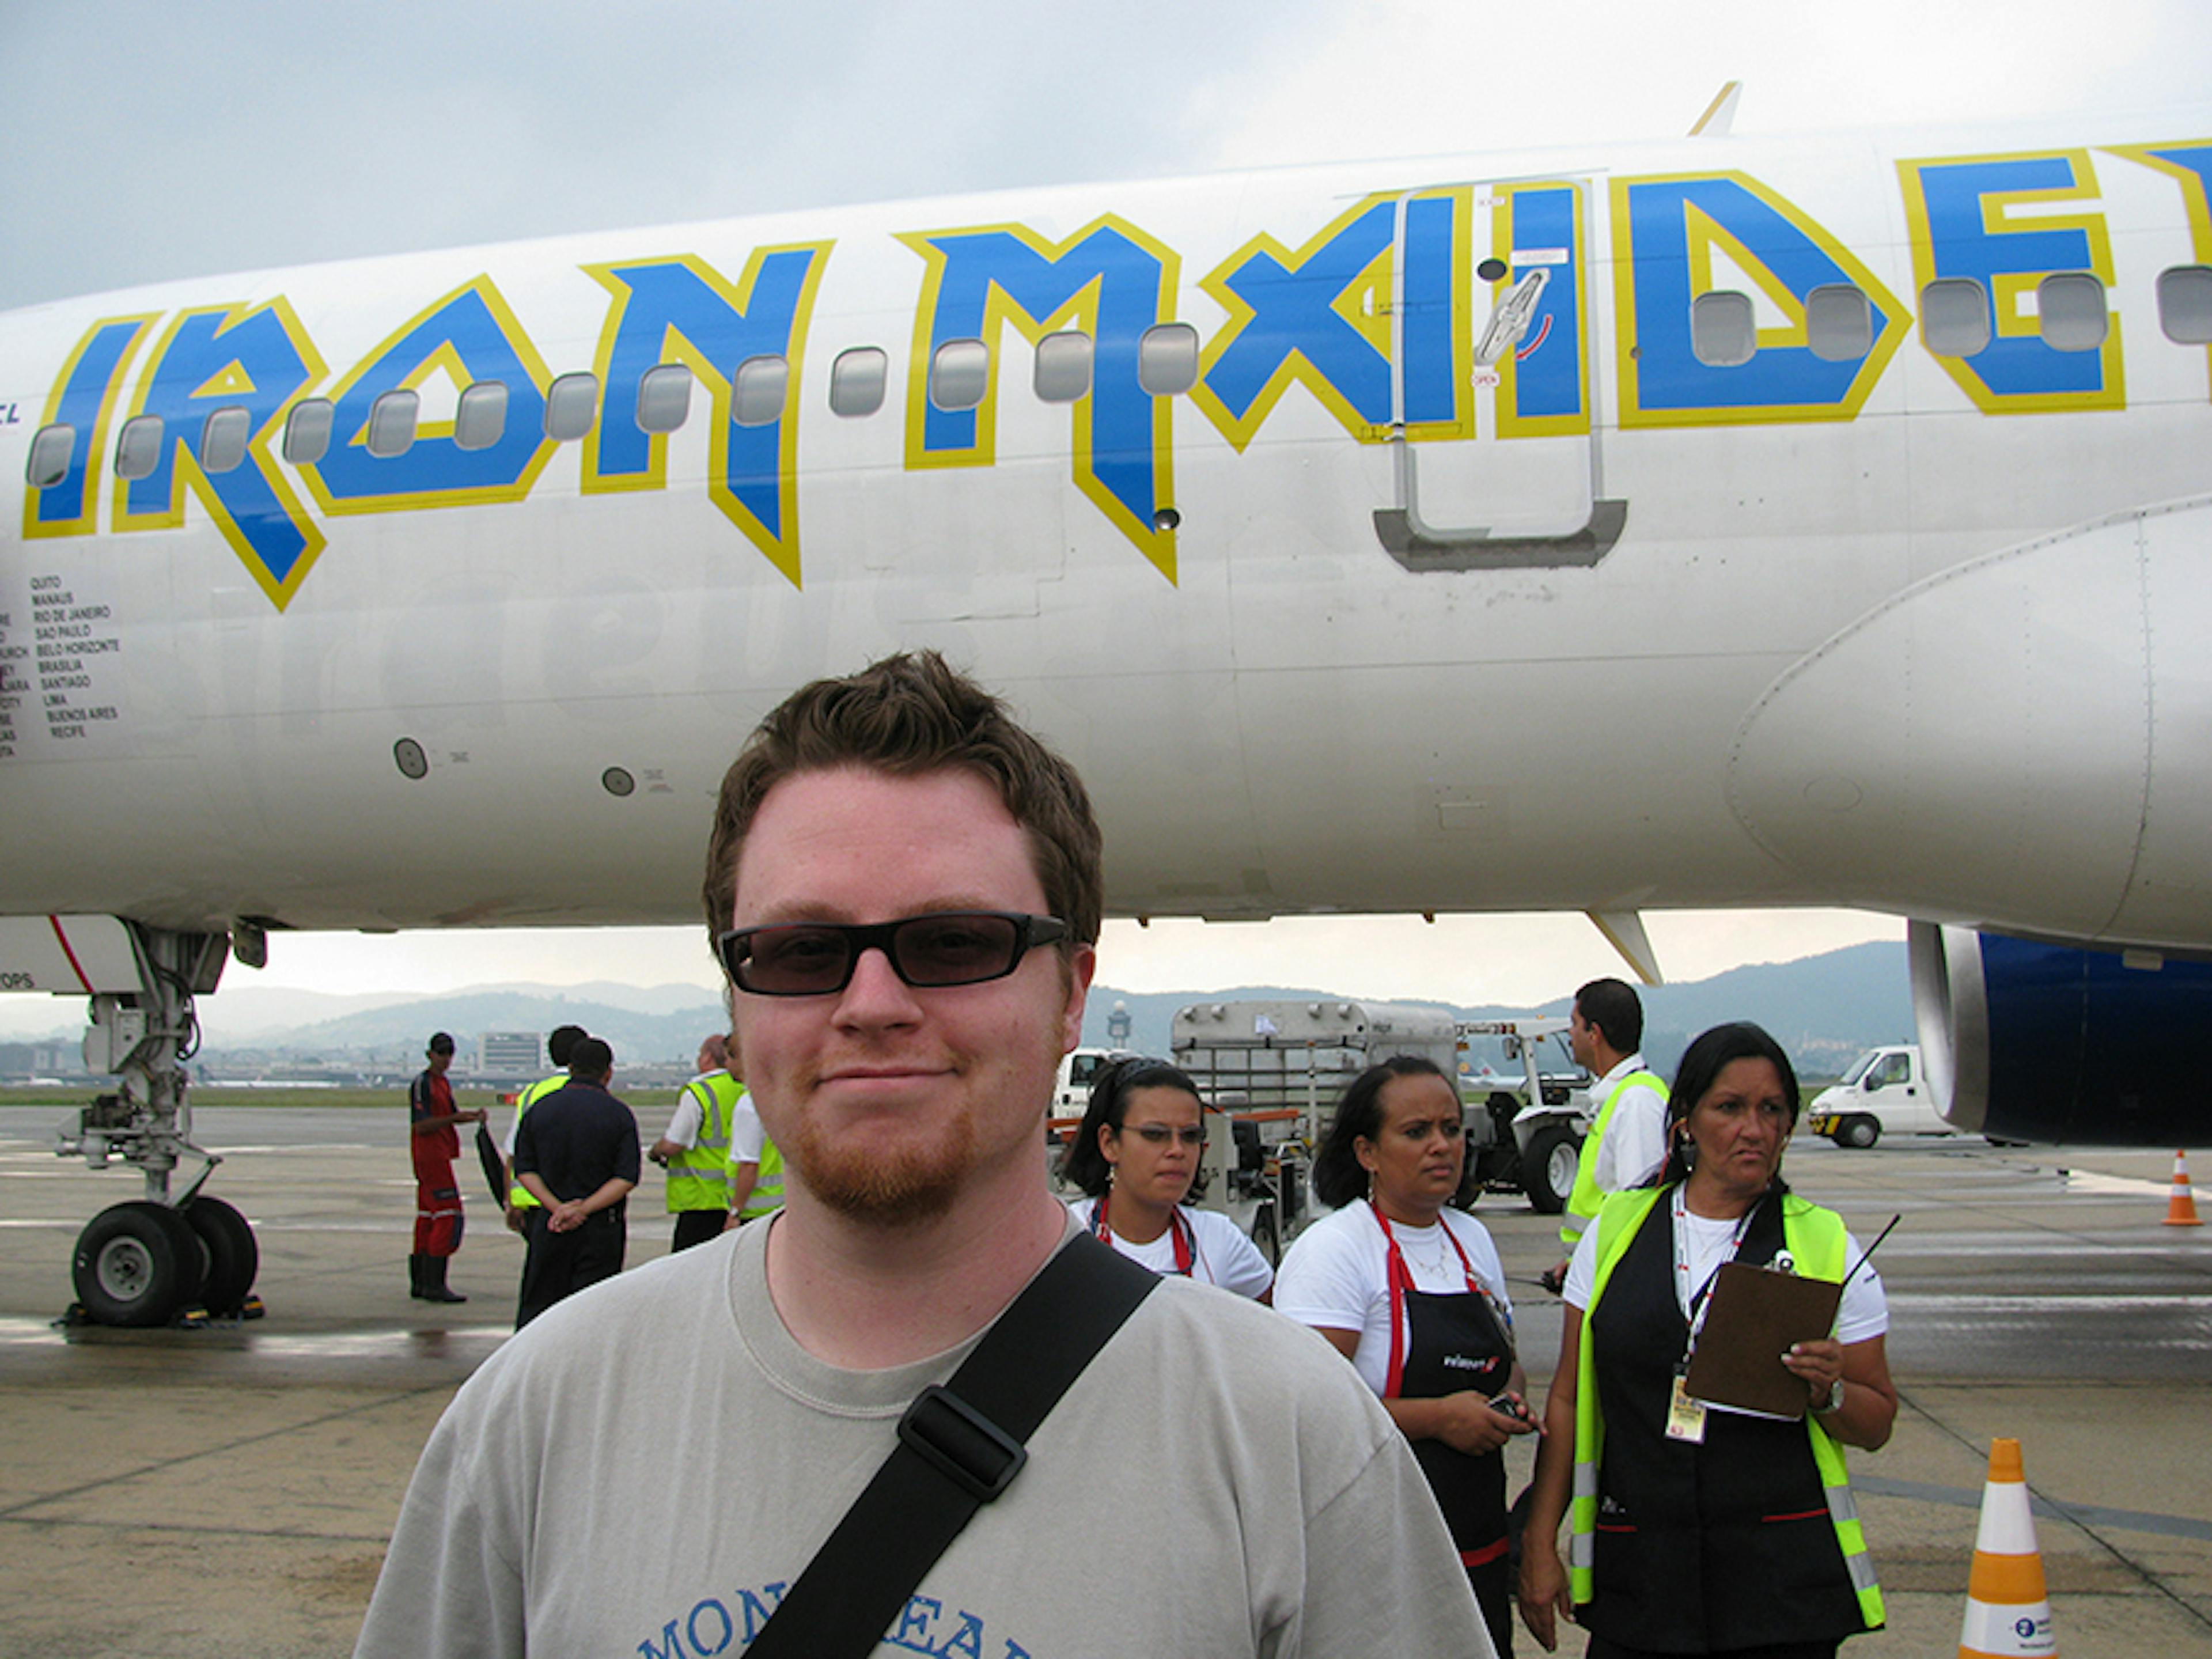 Aces High: What it’s like to fly on Iron Maiden’s Ed Force One